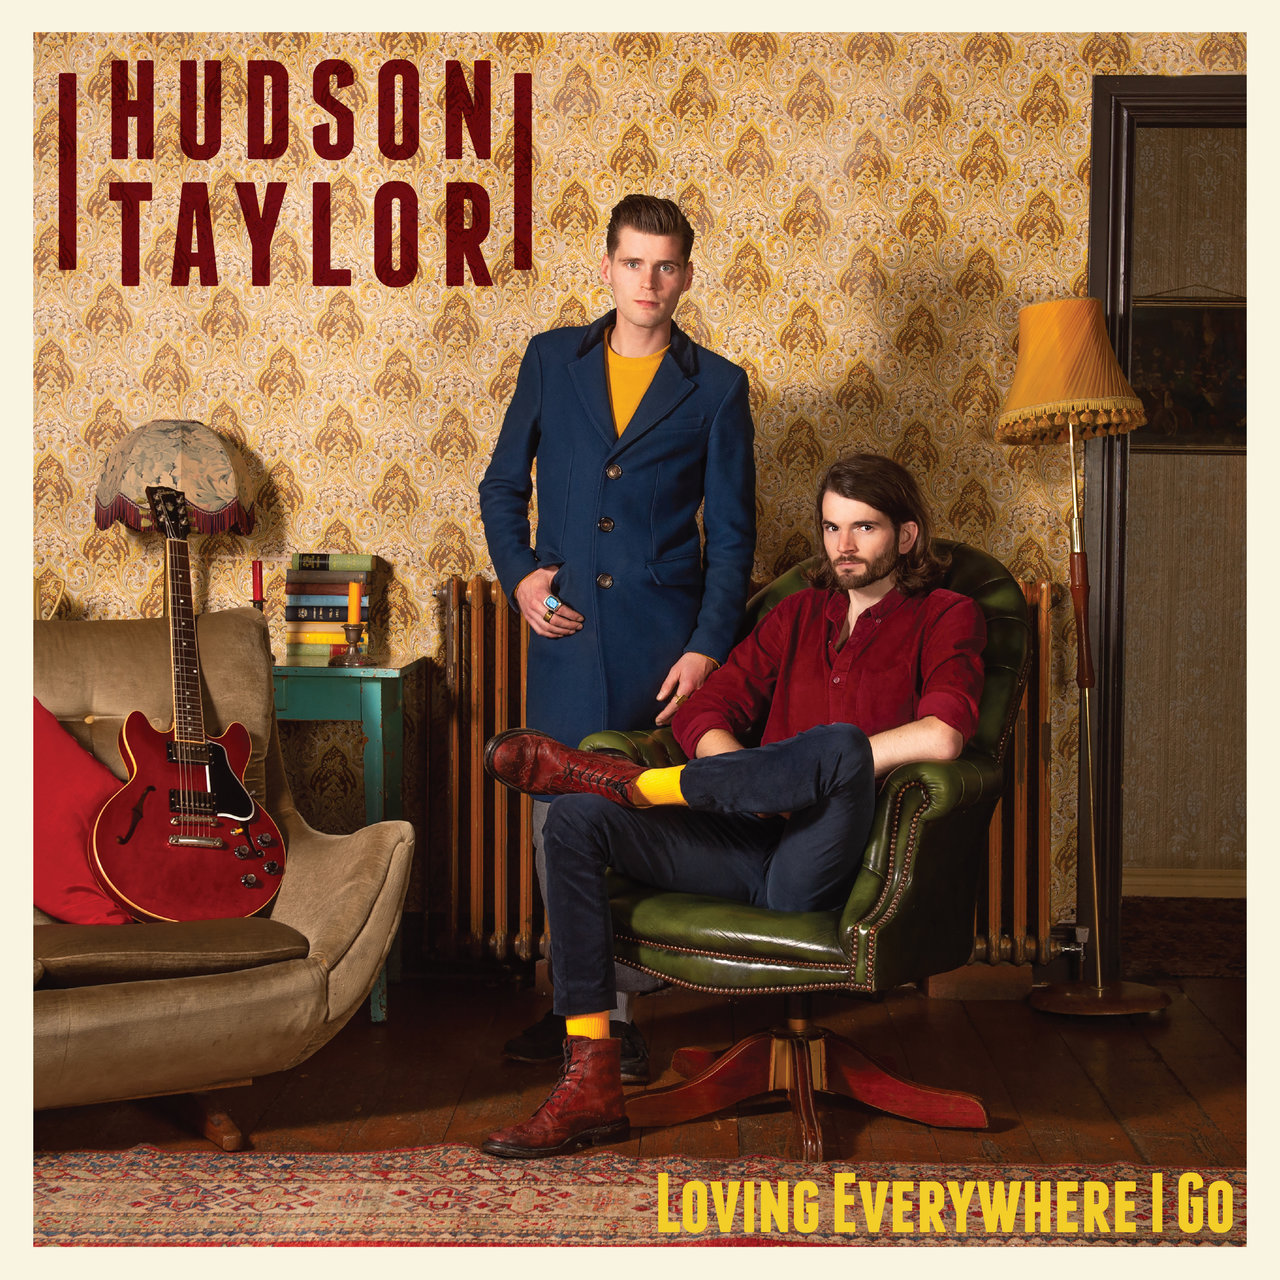 Hudson Taylor — What Do You Mean? cover artwork